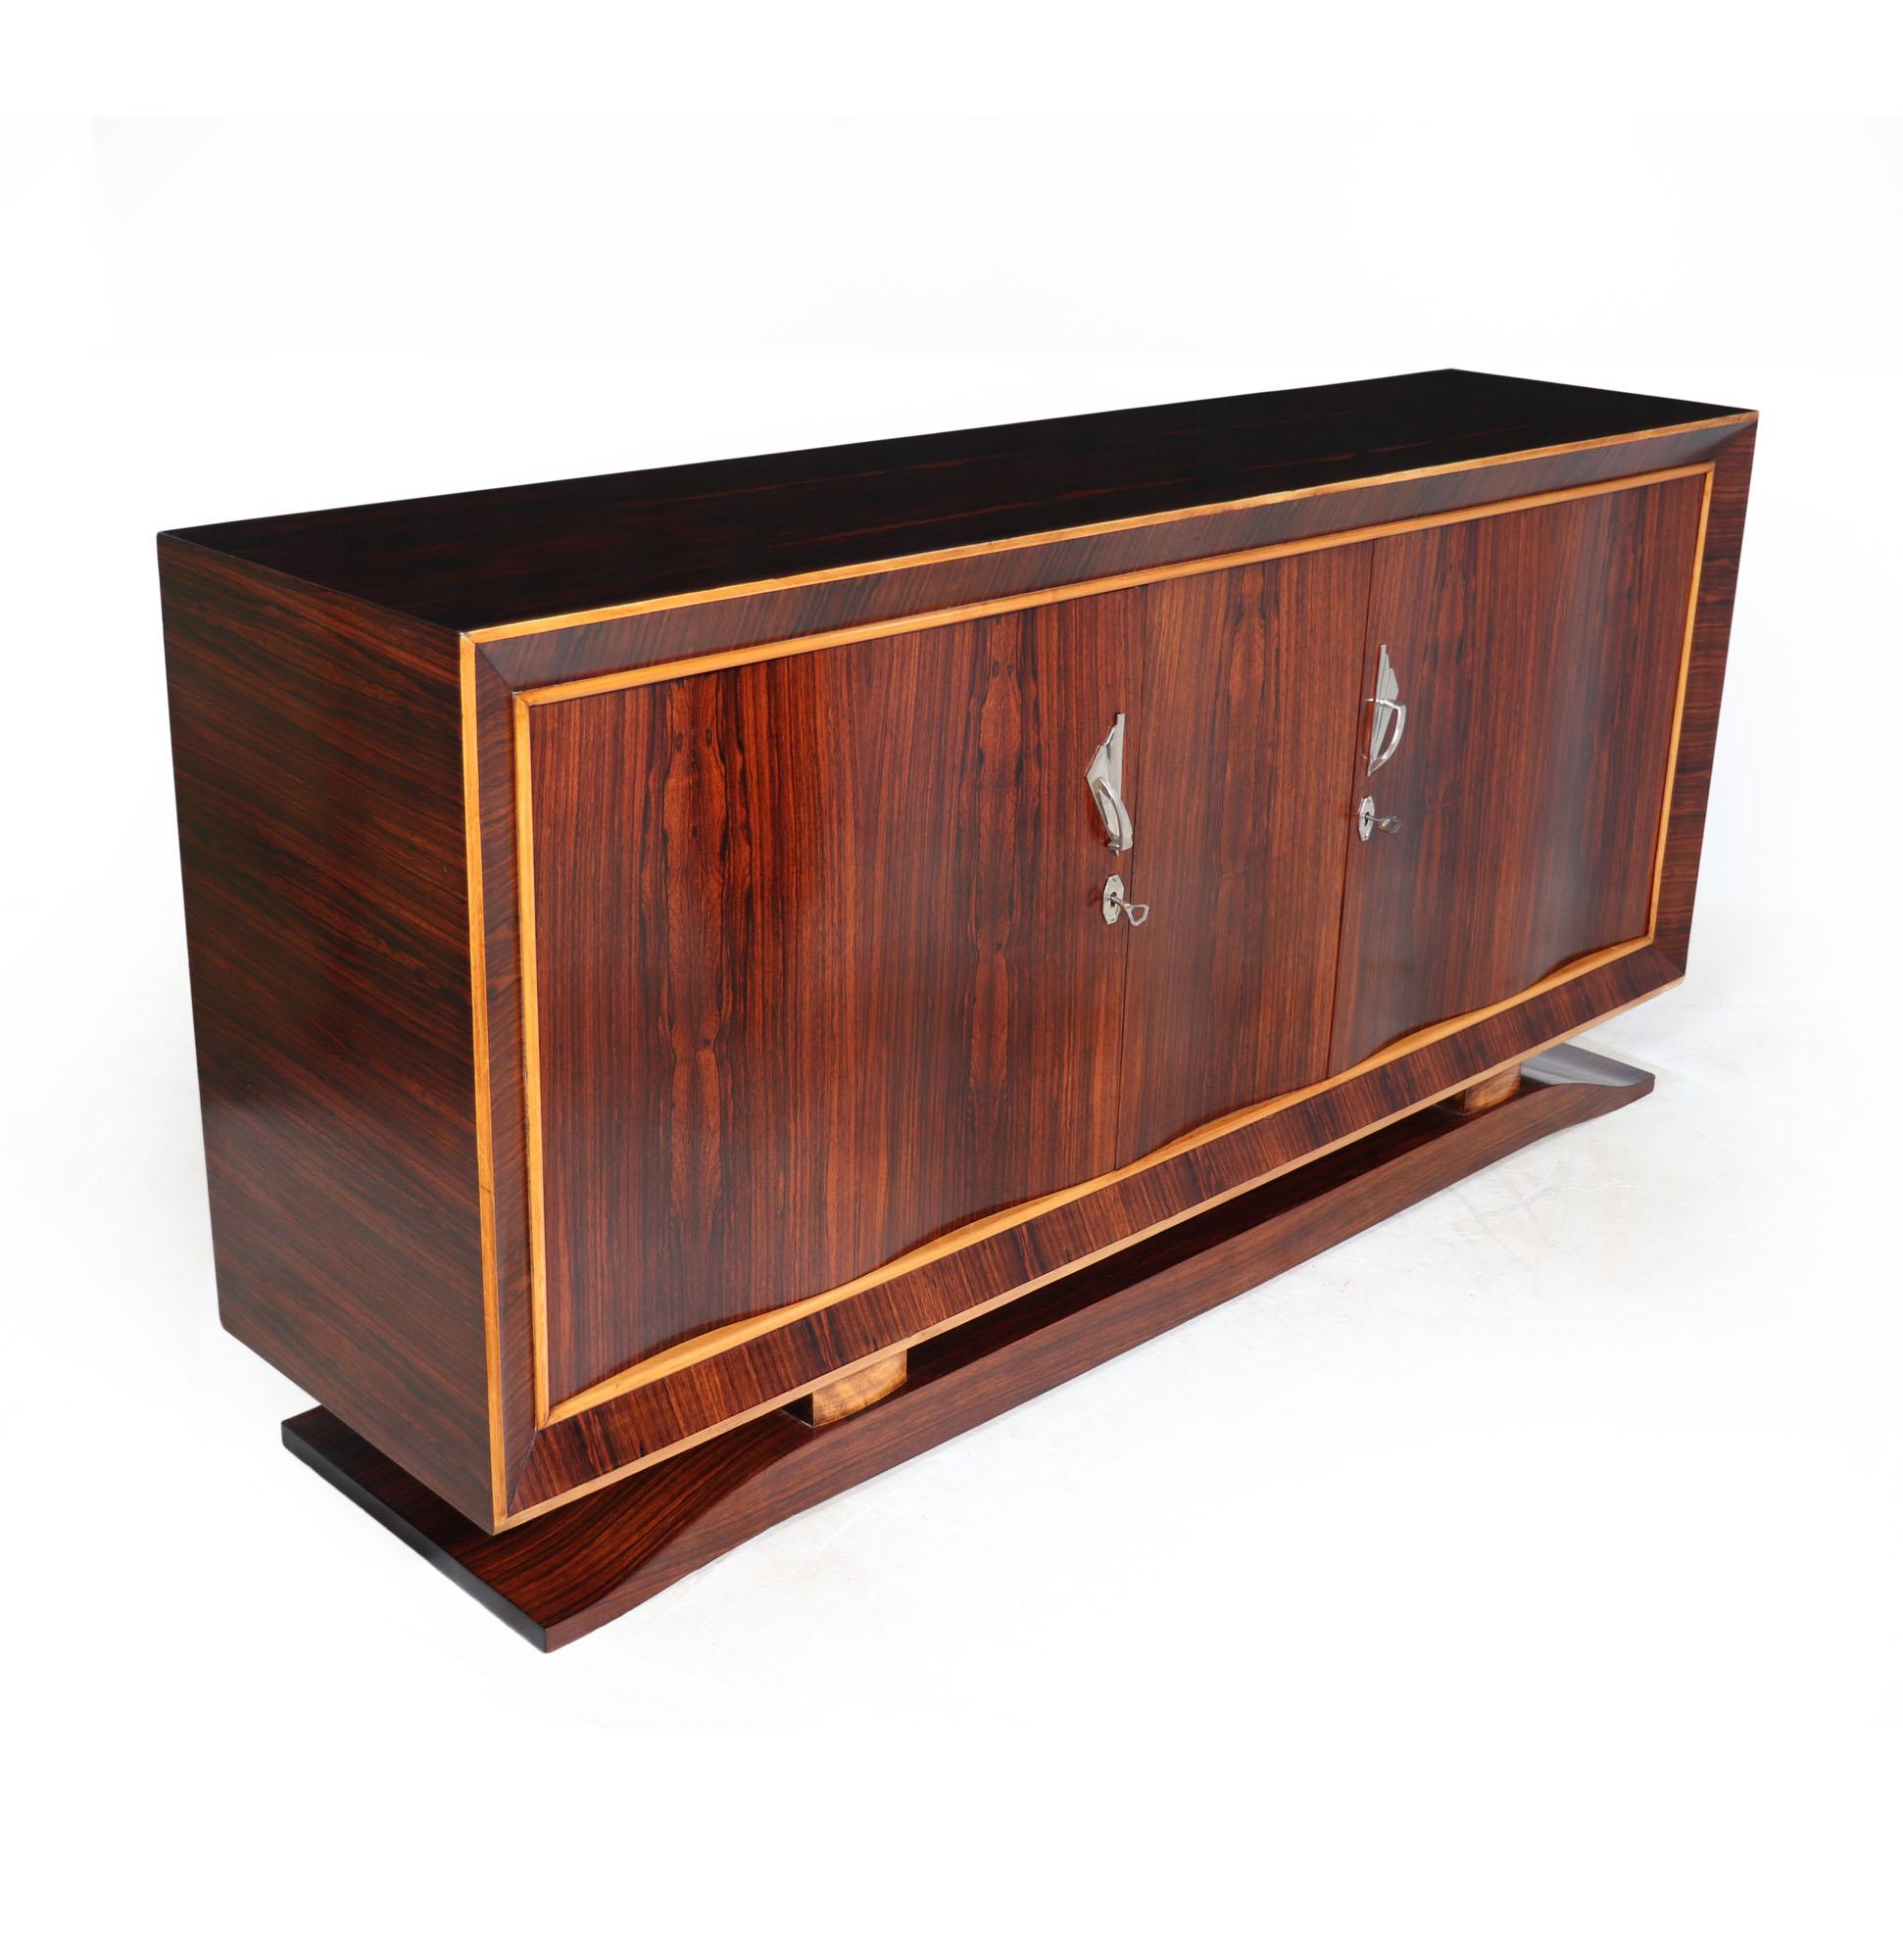 Early 20th Century French Art Deco Sideboard in Rosewood